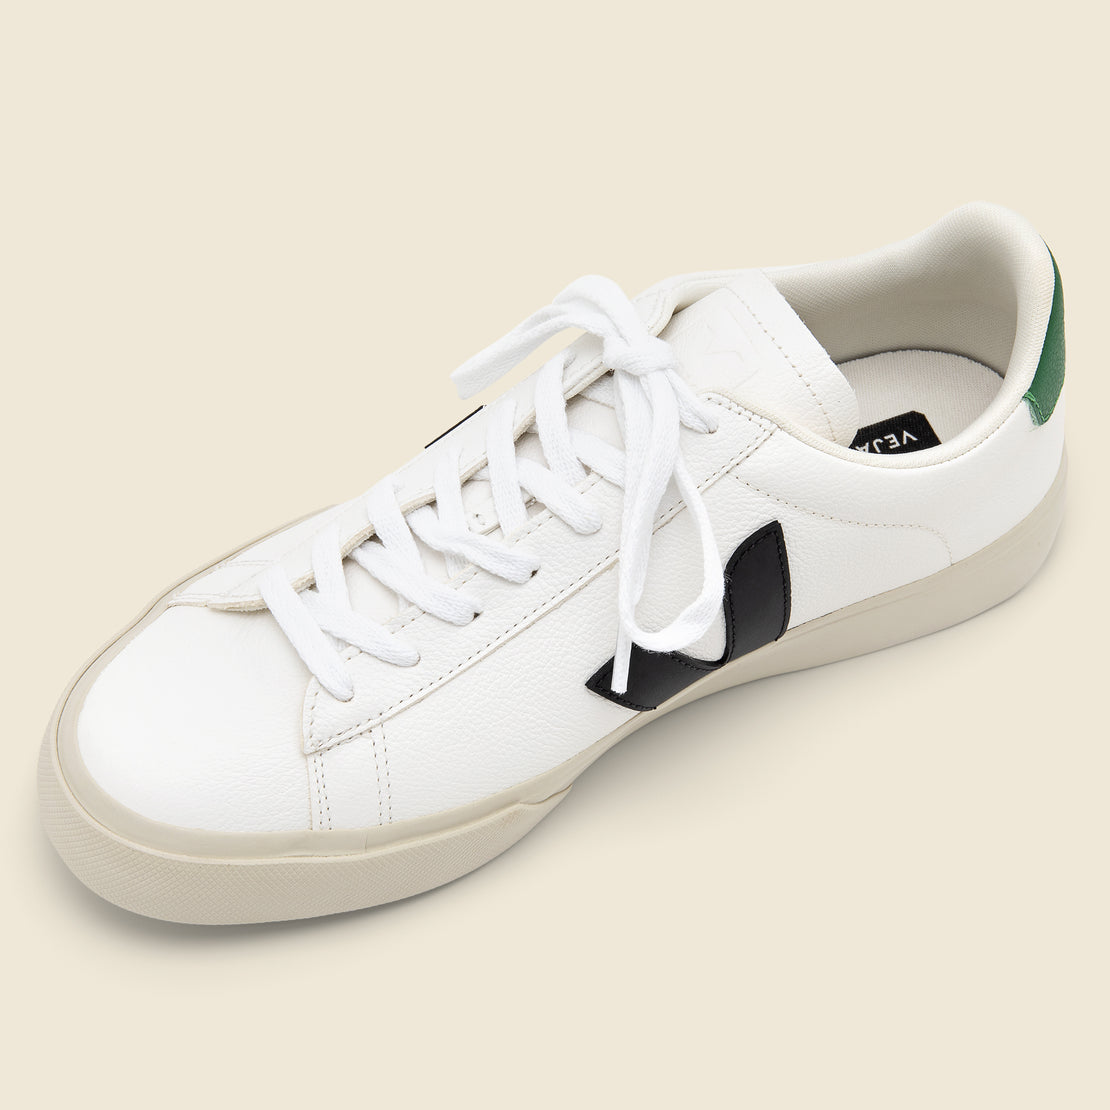 Campo Leather Sneaker - Extra White/Emaraude/Black - Veja - STAG Provisions - Shoes - Athletic